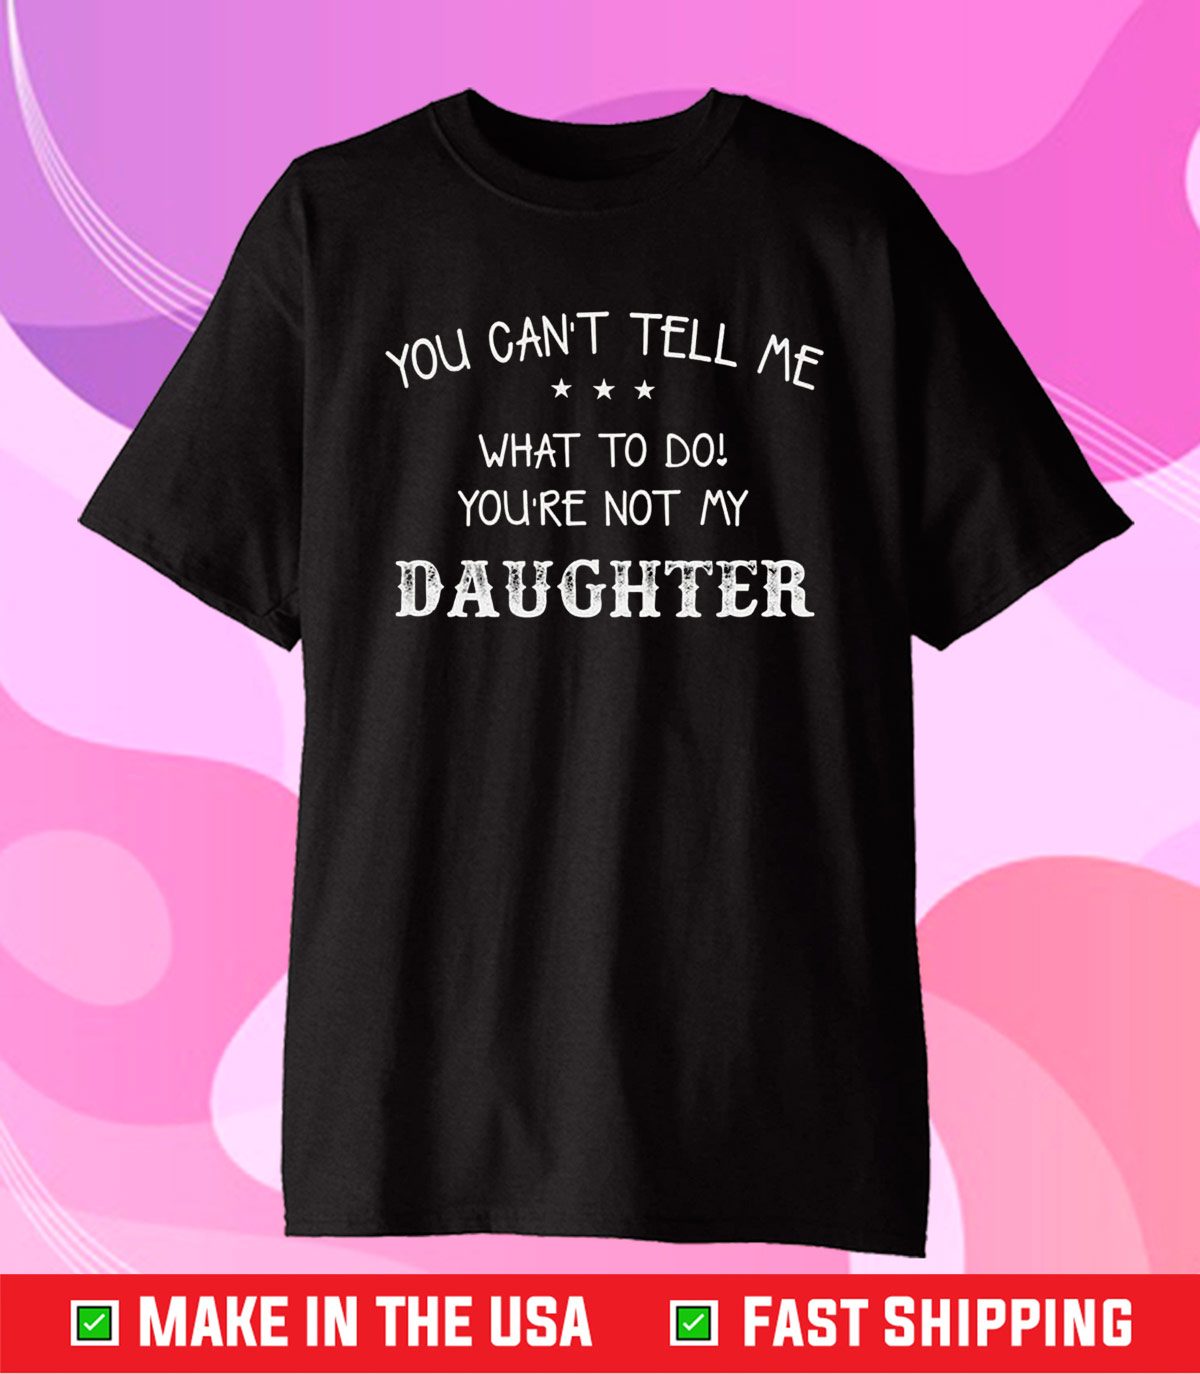 You Cant Tell Me What To Do Youre Not My Daughter T Tshirts Shirtelephant Office 